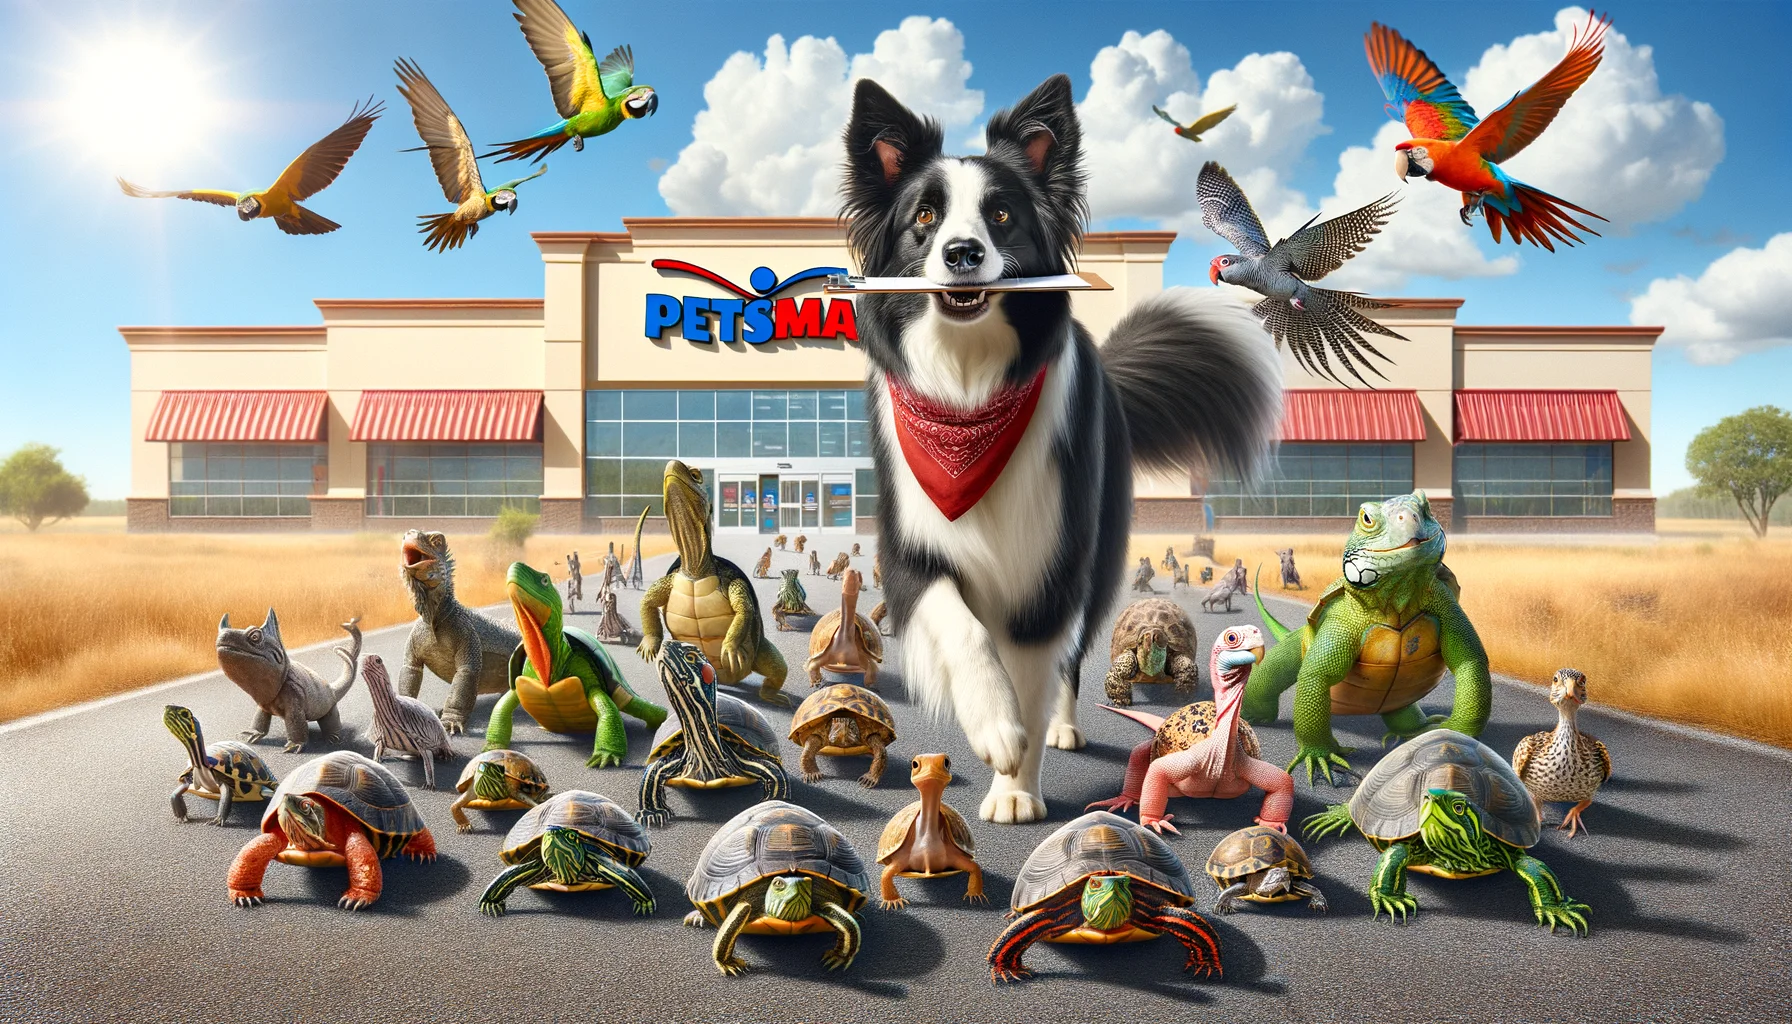 Compose a humoristic and lifelike representation of a PetSmart Affiliate Program. Imagine a situation where a friendly and smart Border Collie, symbolizing the affiliate marketer, is leading a host of diverse, eager animals such as iguanas, turtles, and parakeets towards a grand PetSmart store under bright sunlight. The Border Collie is wearing a red bandana around its neck with a tiny clipboard in its teeth, seemingly explaining the benefits of the affiliate program to the diverse bunch of animals who are attentively listening and waddling, flying or slithering along.